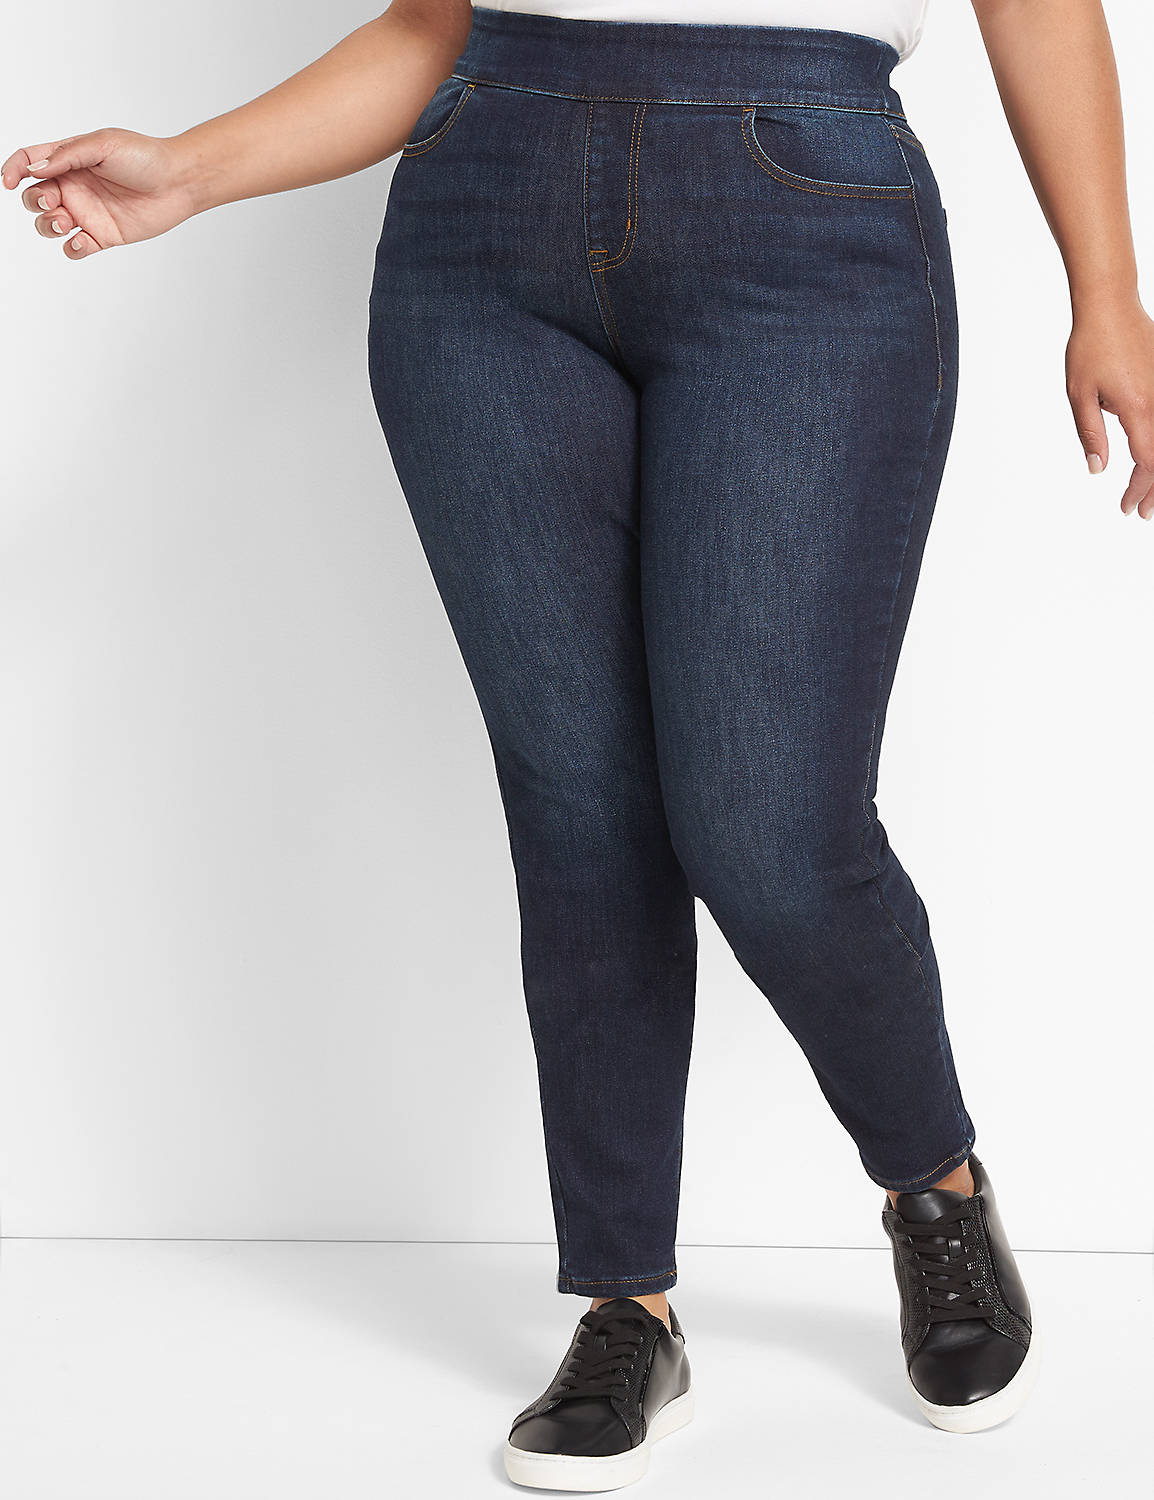 High-Rise Cozy Pull-On Jegging - Dark Wash Product Image 1